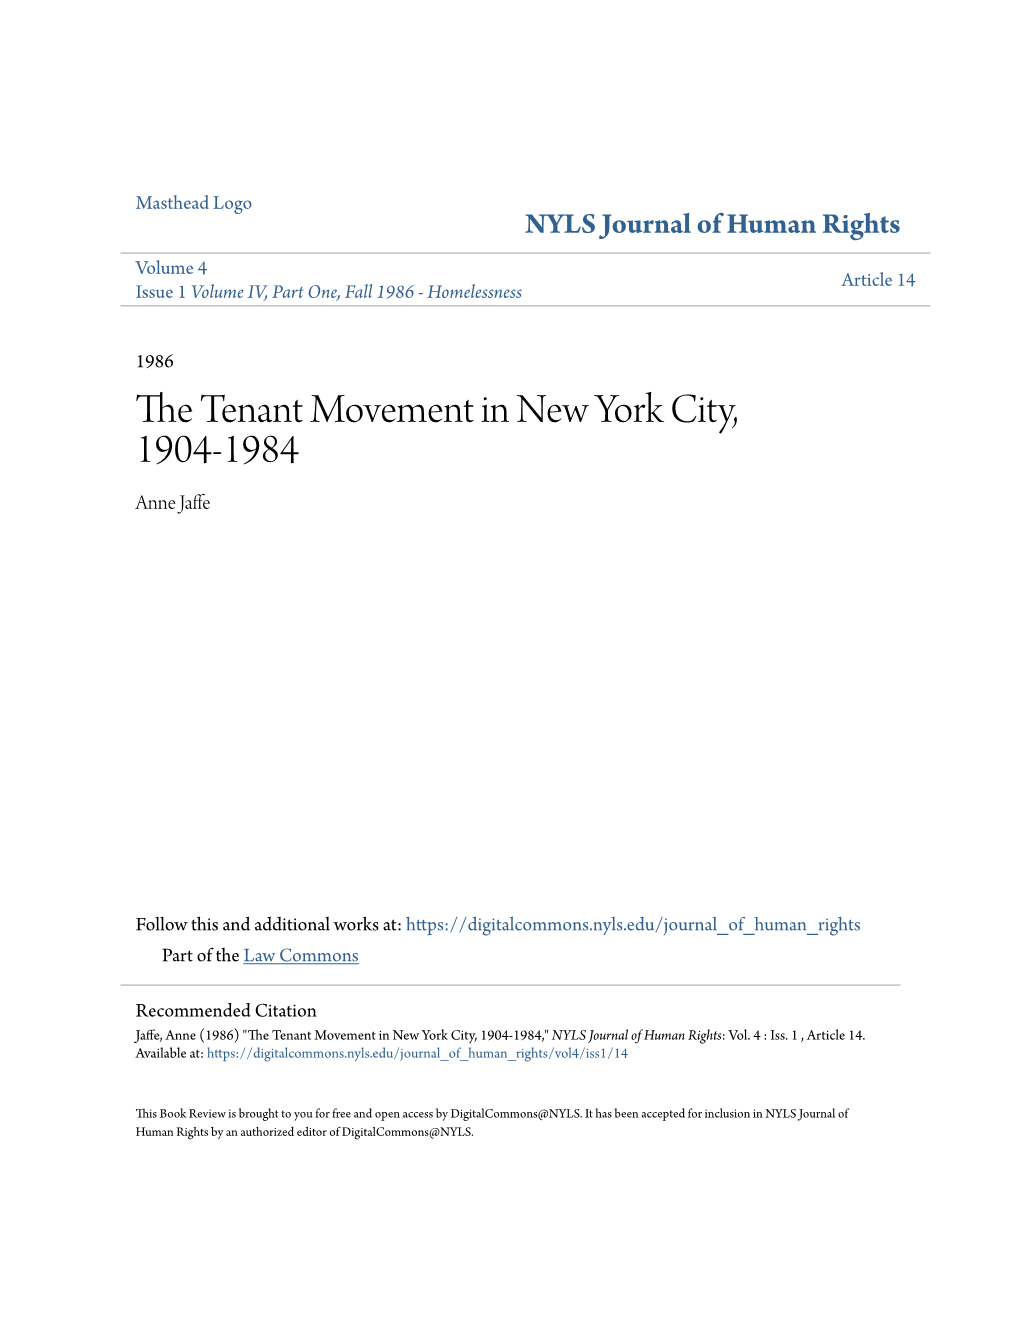 The Tenant Movement in New York City, 1904-1984